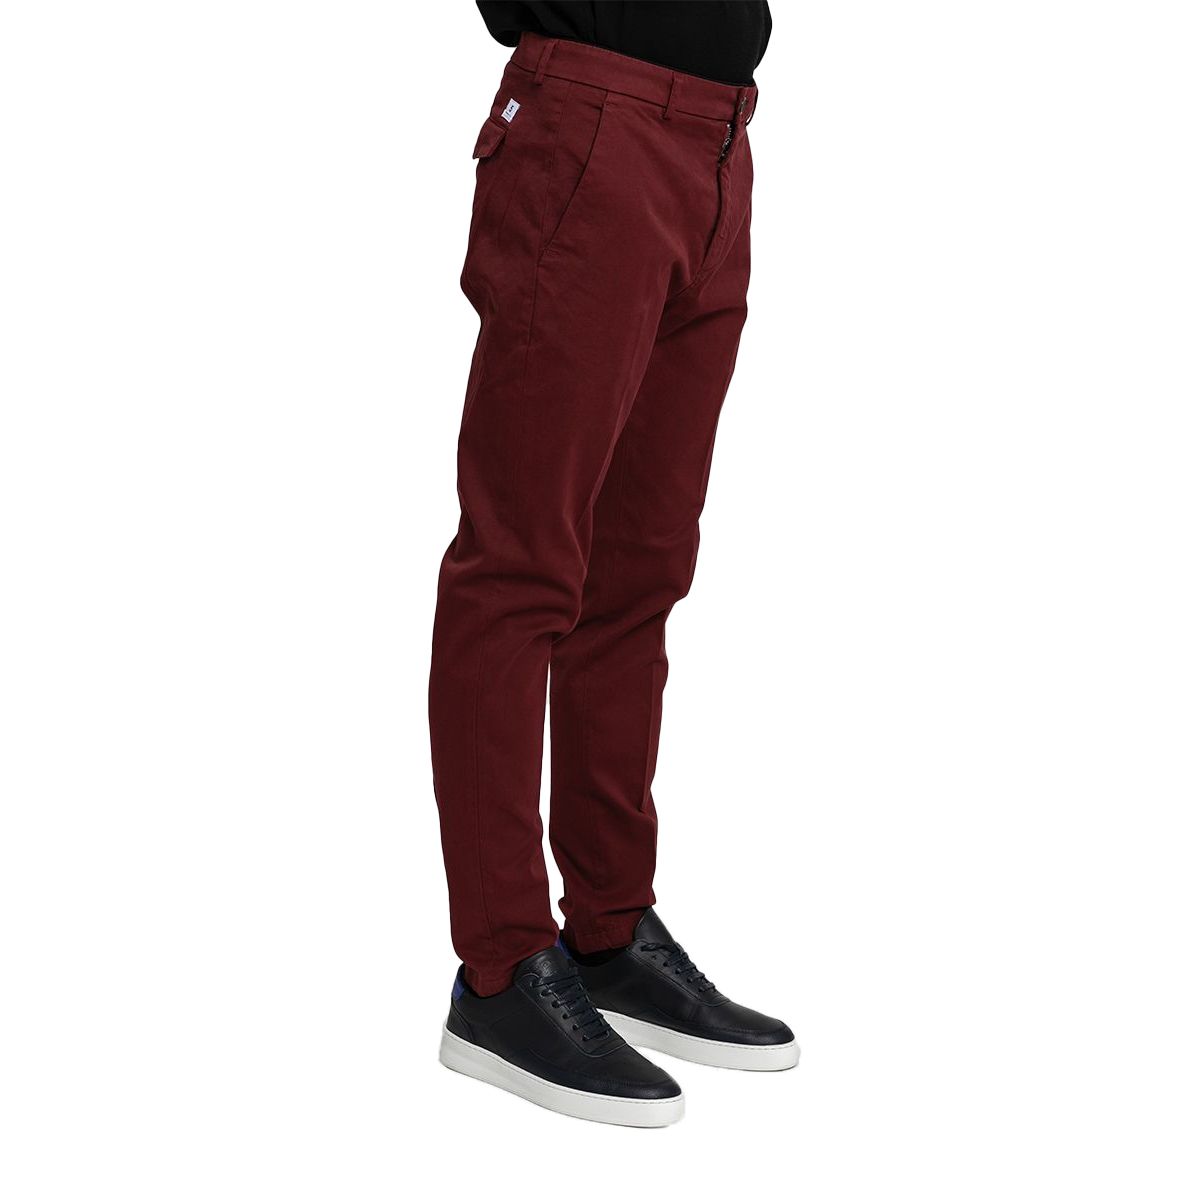 Prince Trousers In Bordeaux